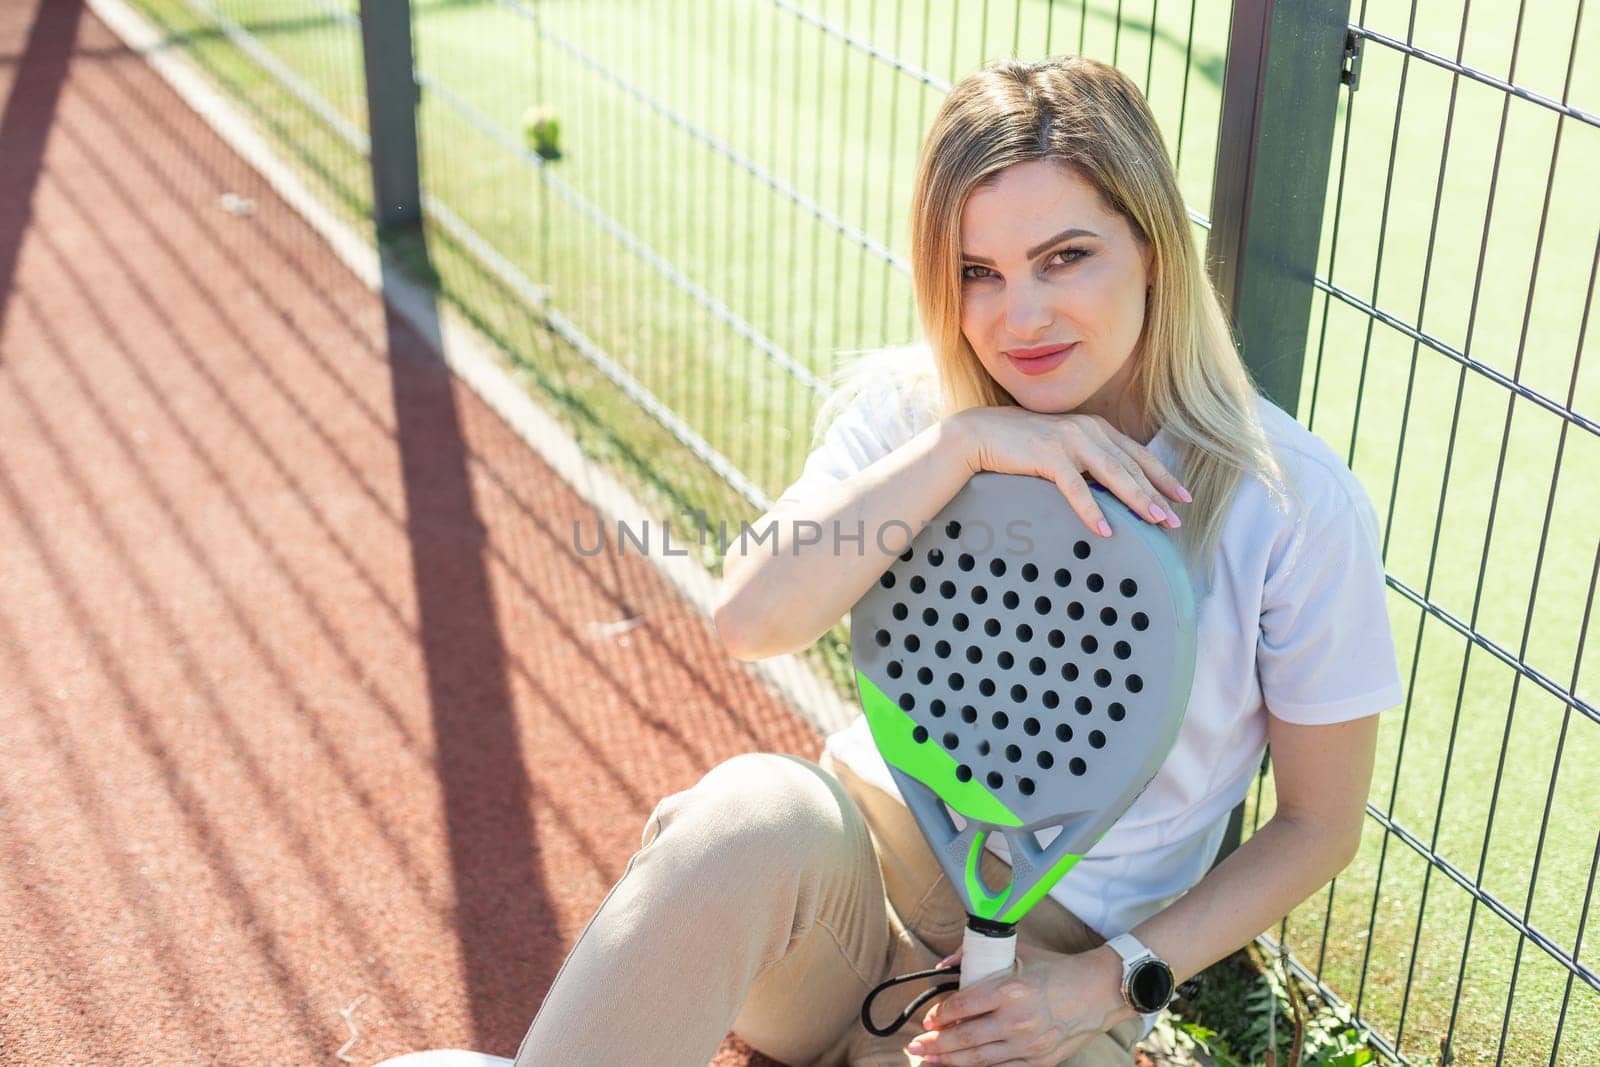 A female paddle tennis player after playing a match. High quality photo